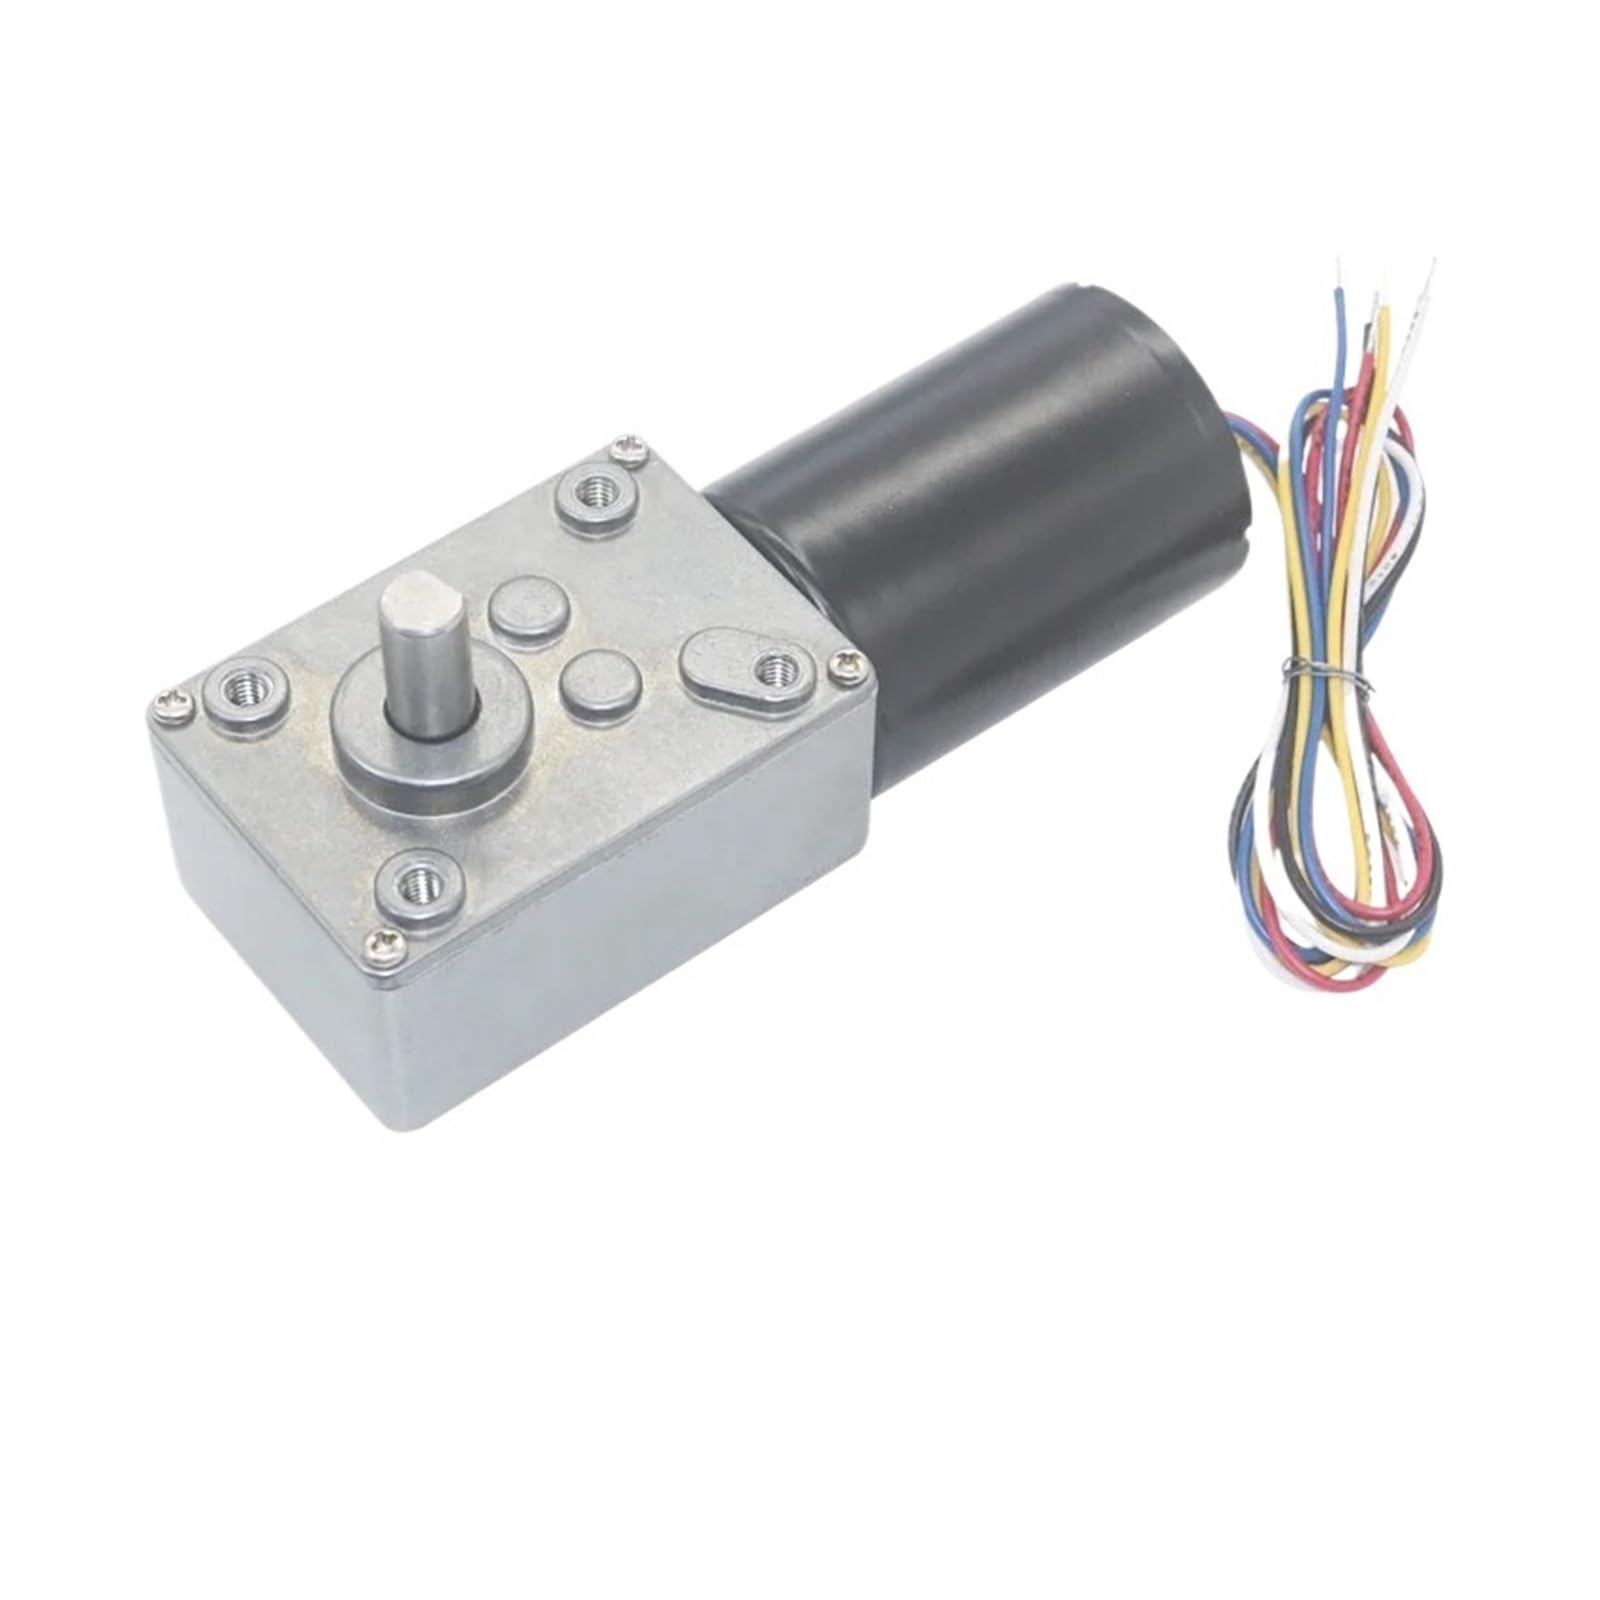 5840-3650 DC brushless gear electronic starter, large torque, long life, low noise, signal feedback can be forward and reverse DC12V 24V IDGTTLDF(STYLE1,12V) von IDGTTLDF